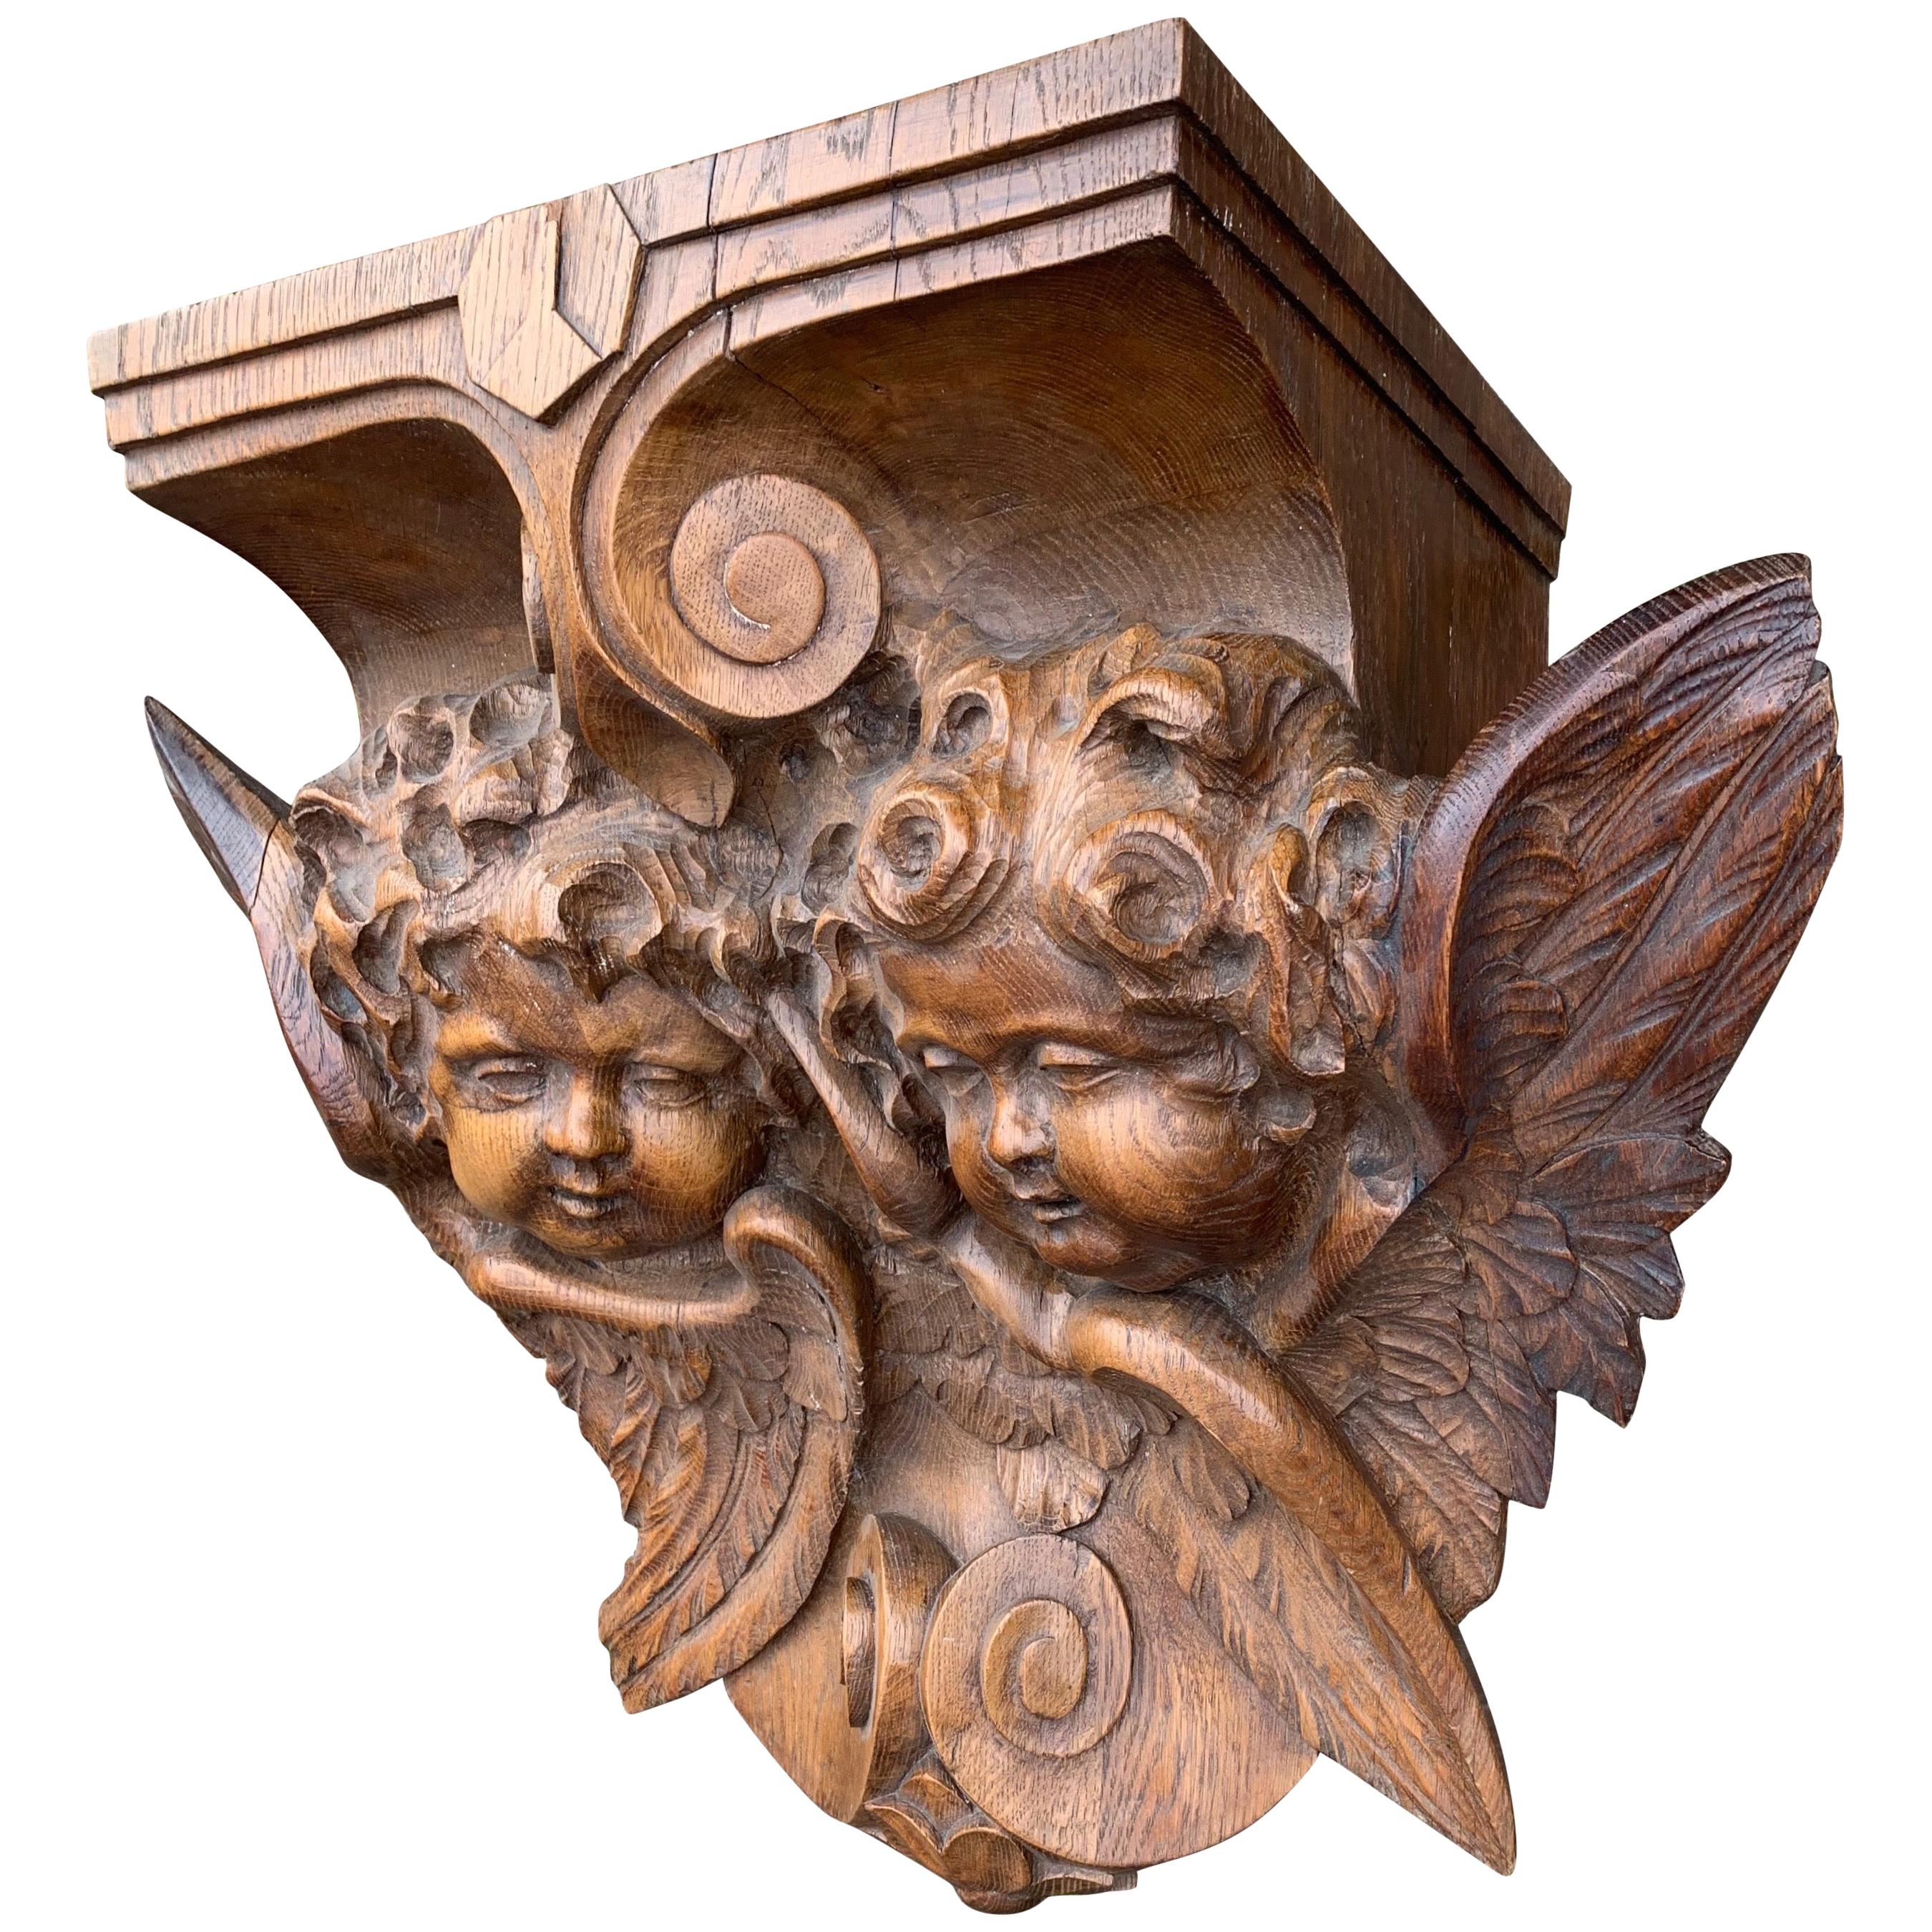 Stunningly hand carved Gothic Art wall bracket / corbel with winged angel sculptures.

In his lifetime, Belgian architect and publicist Auguste Van Assche (1826-1907) created and renovated many churches and monasteries and he was also known for his